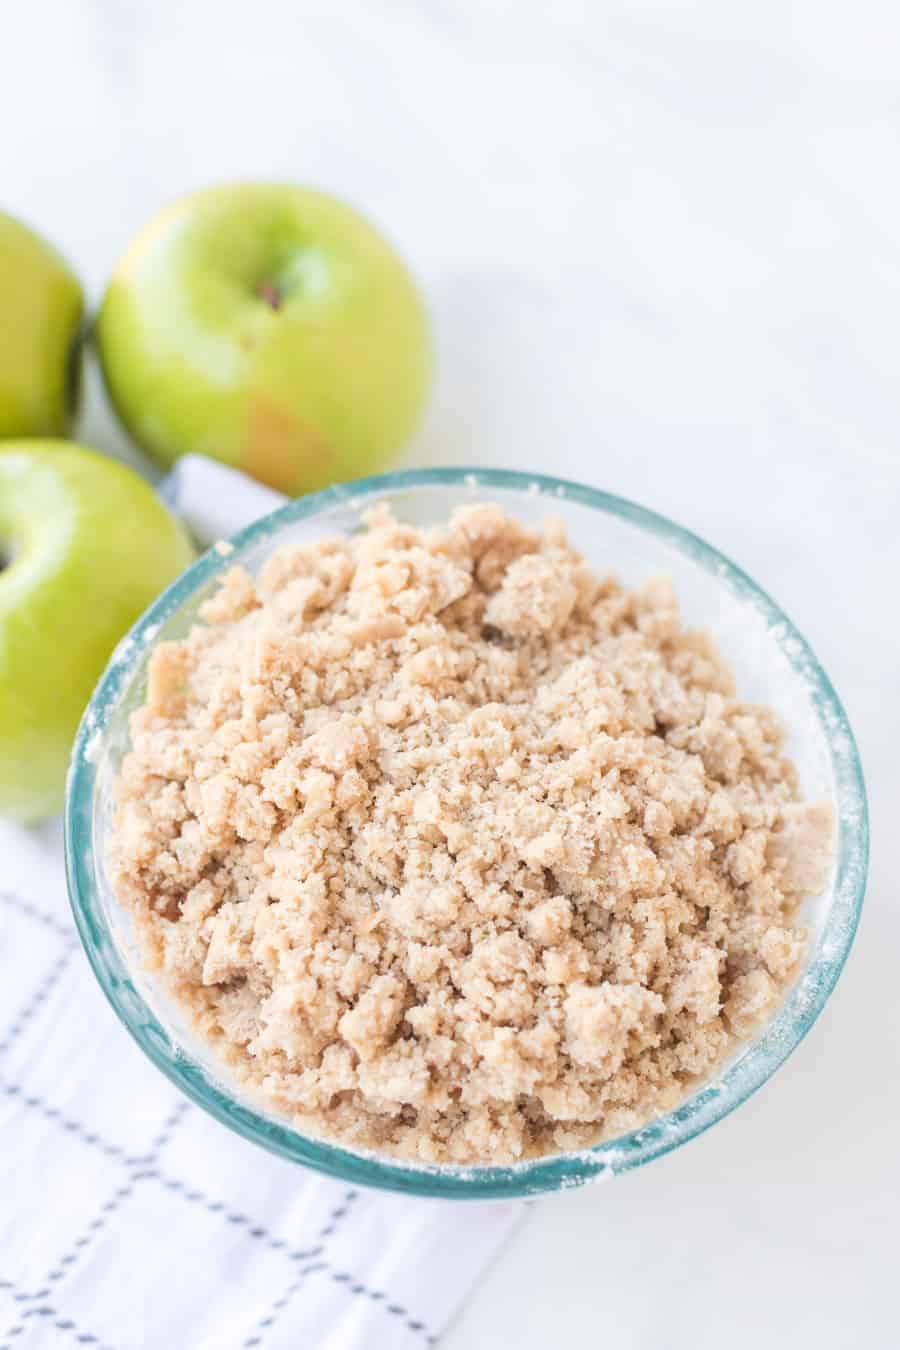 Apple crumb cake is a sweet, crumbly, and delicious fruit dessert that you can make on a cool fall day to use up the rest of those apples lying around! Baking made super simple, this easy apple crumb cake comes together easily with your favorite kind of apples and a sugar-cinnamon crumbly topping! #crumbcake #applecrumbcake #cake #apple #applecake #baking #dessert